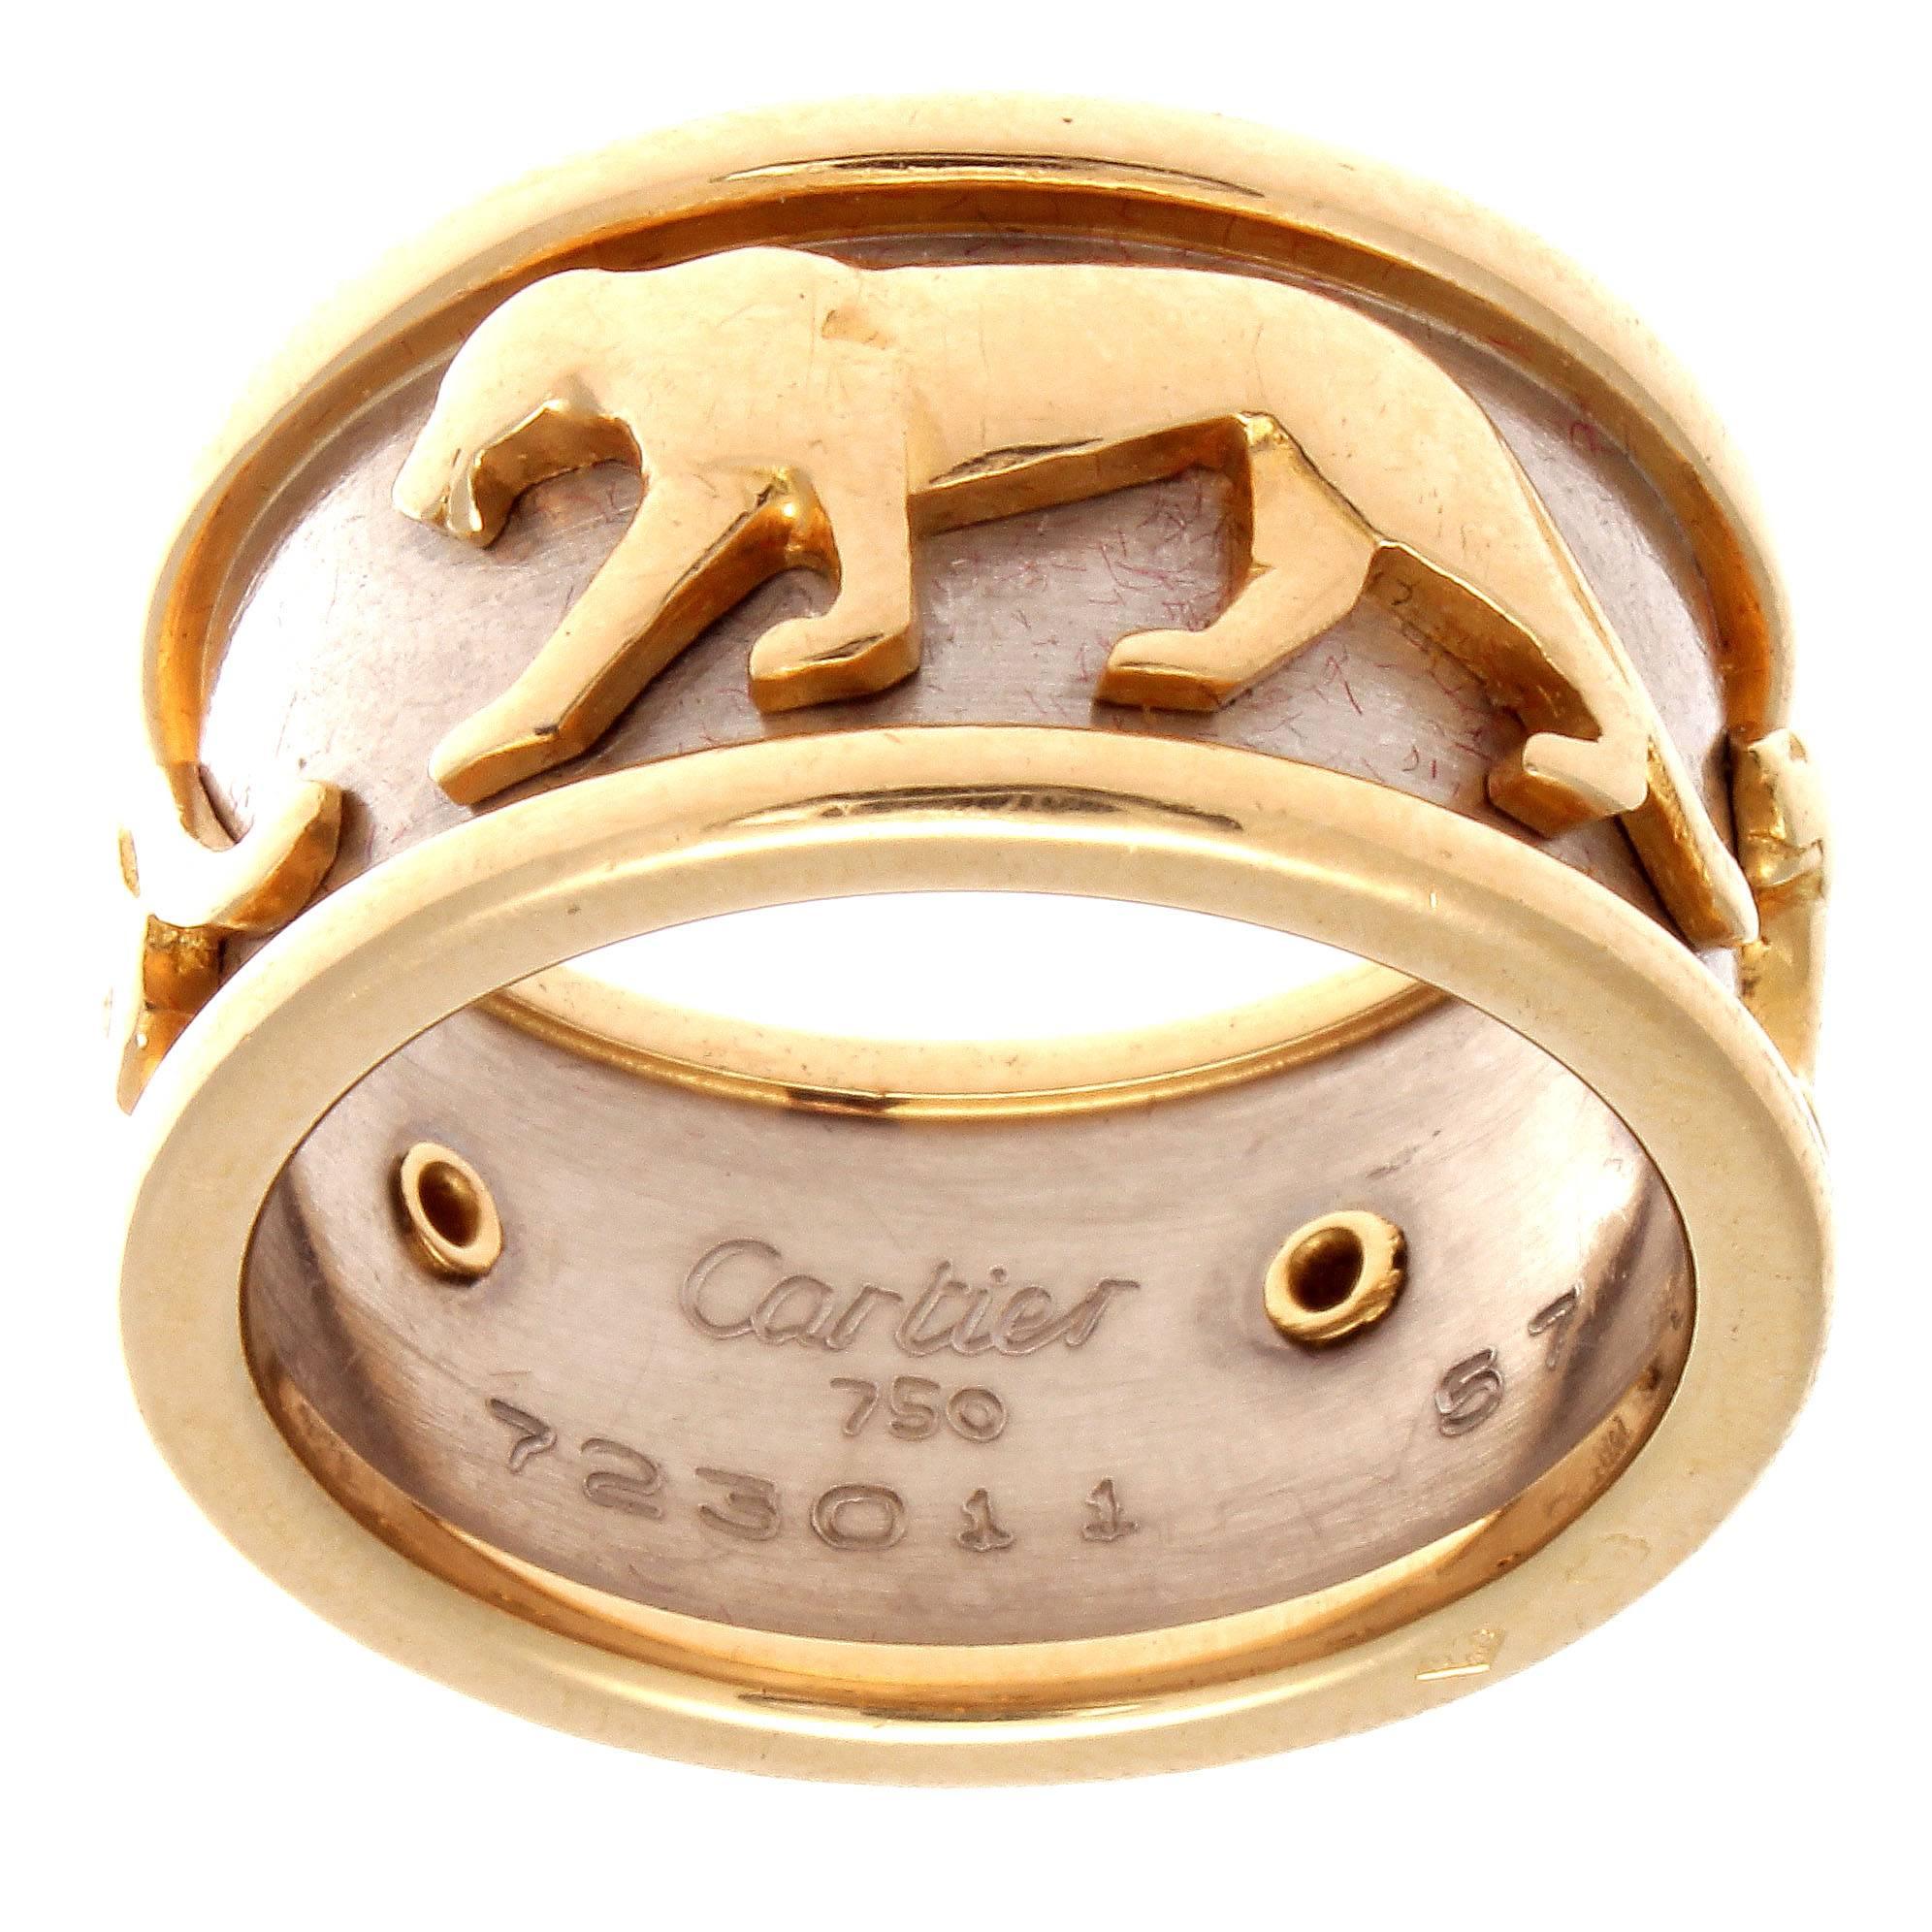 The classic Panthere collection from the stylish designers at Cartier. Crafted in 18k yellow and white gold. Signed Cartier and numbered.

Ring size 8-1/4.